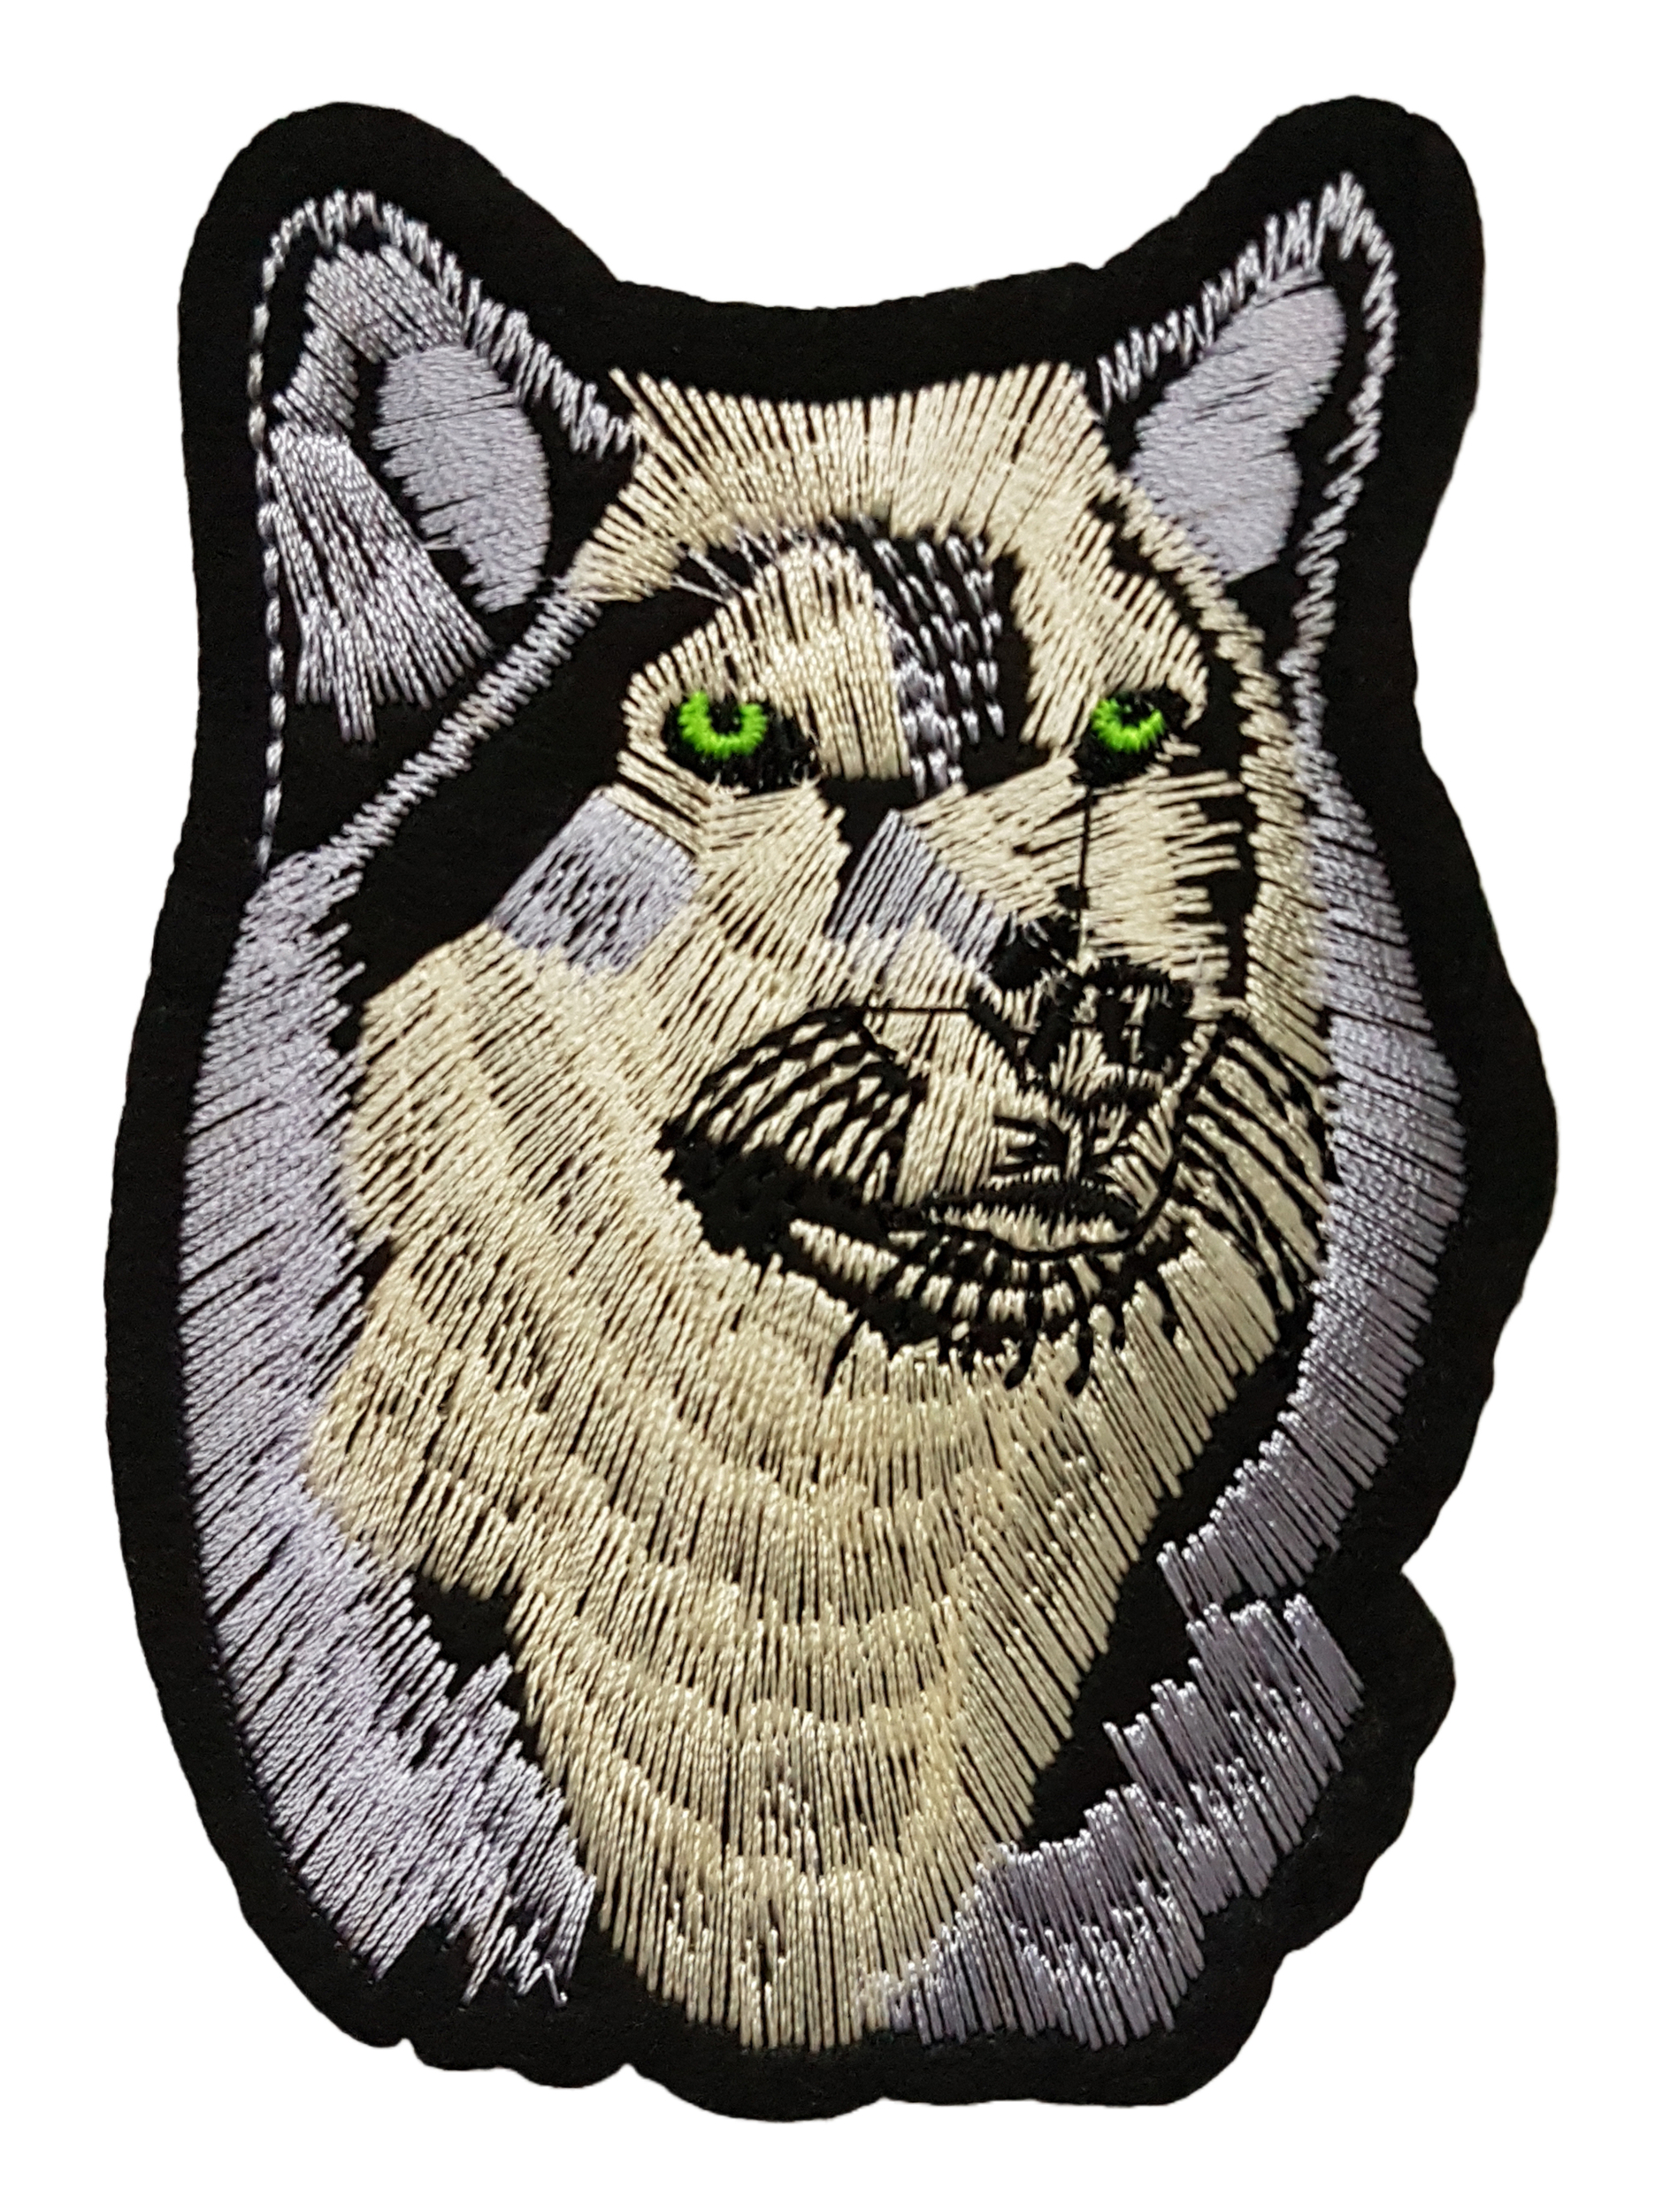 Patch thermocollant loup gris chien